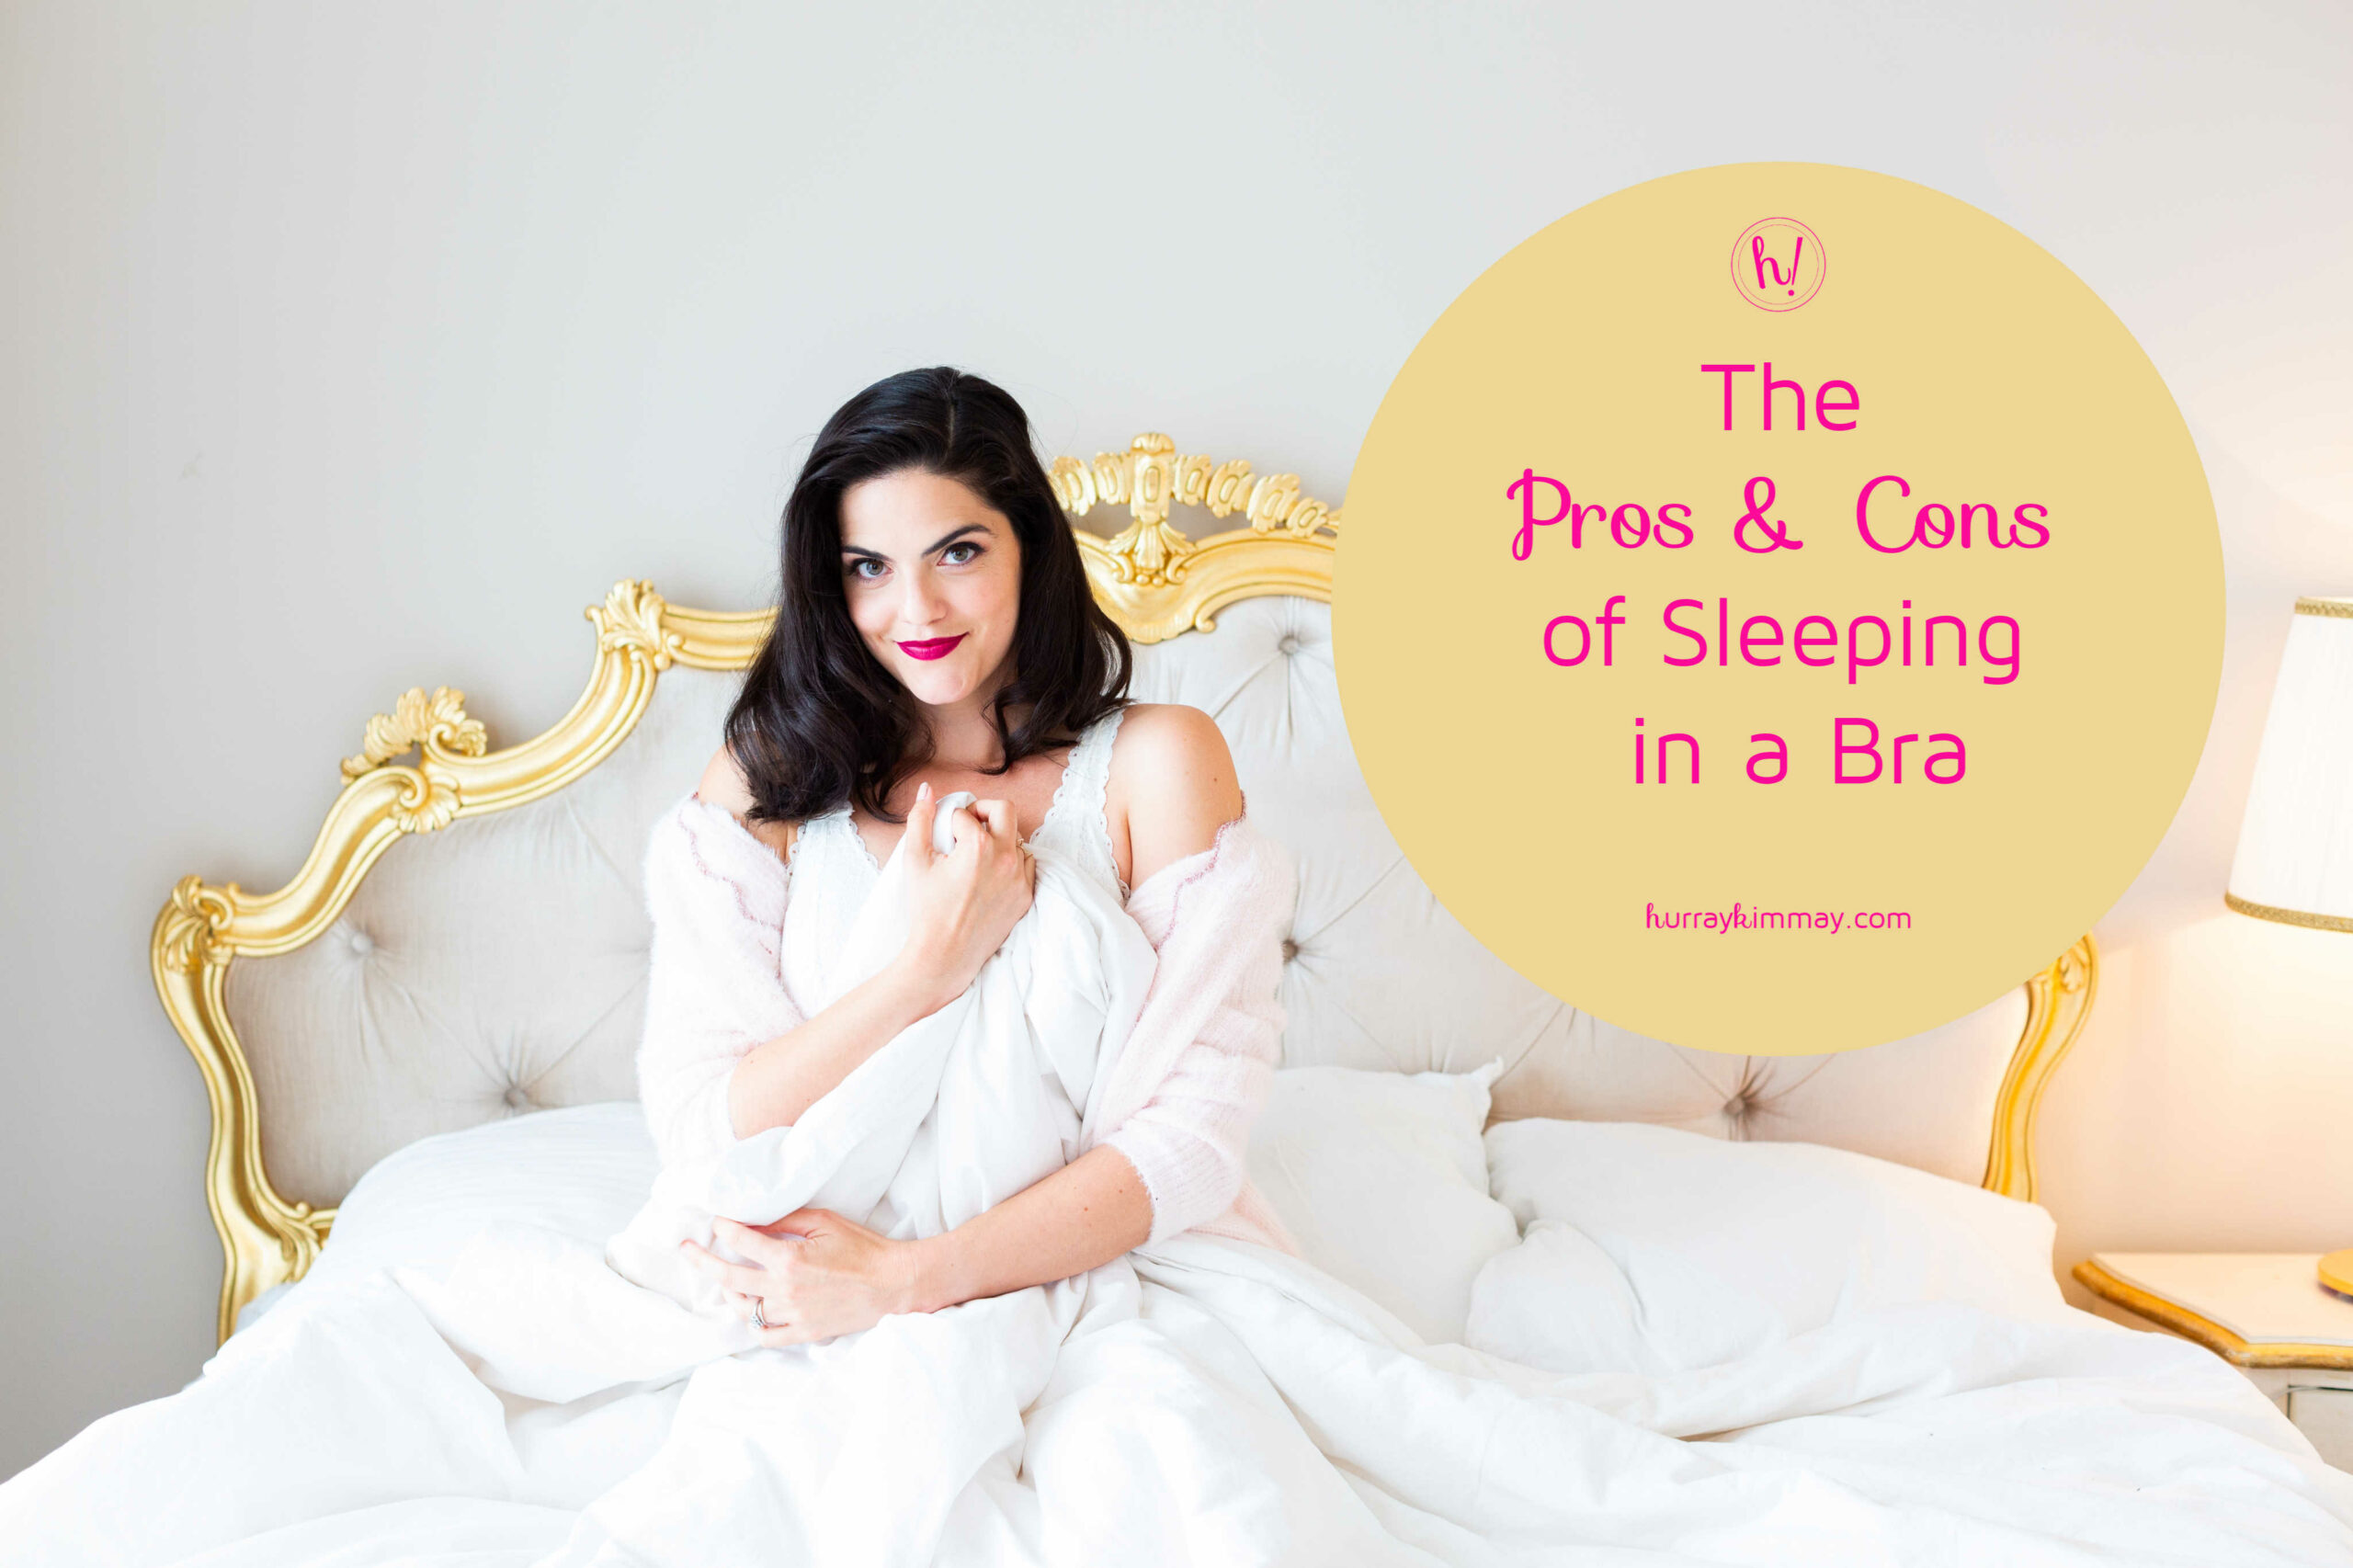 Pros & Cons of Sleeping in a Bra - Hurray Kimmay